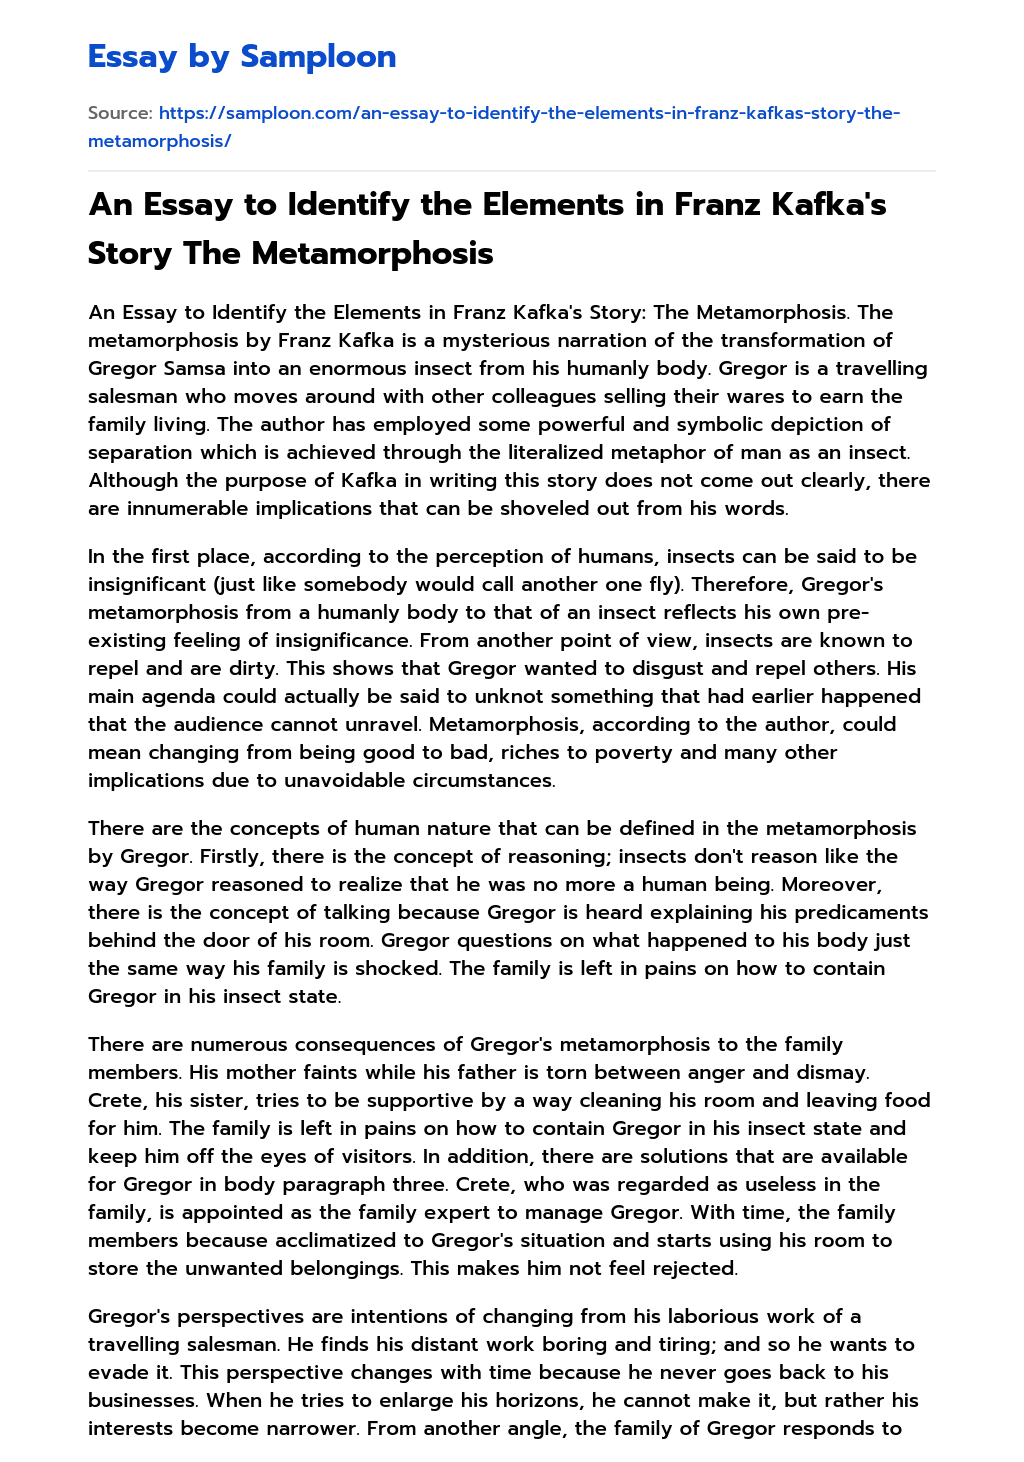 An Essay to Identify the Elements in Franz Kafka’s Story The Metamorphosis essay